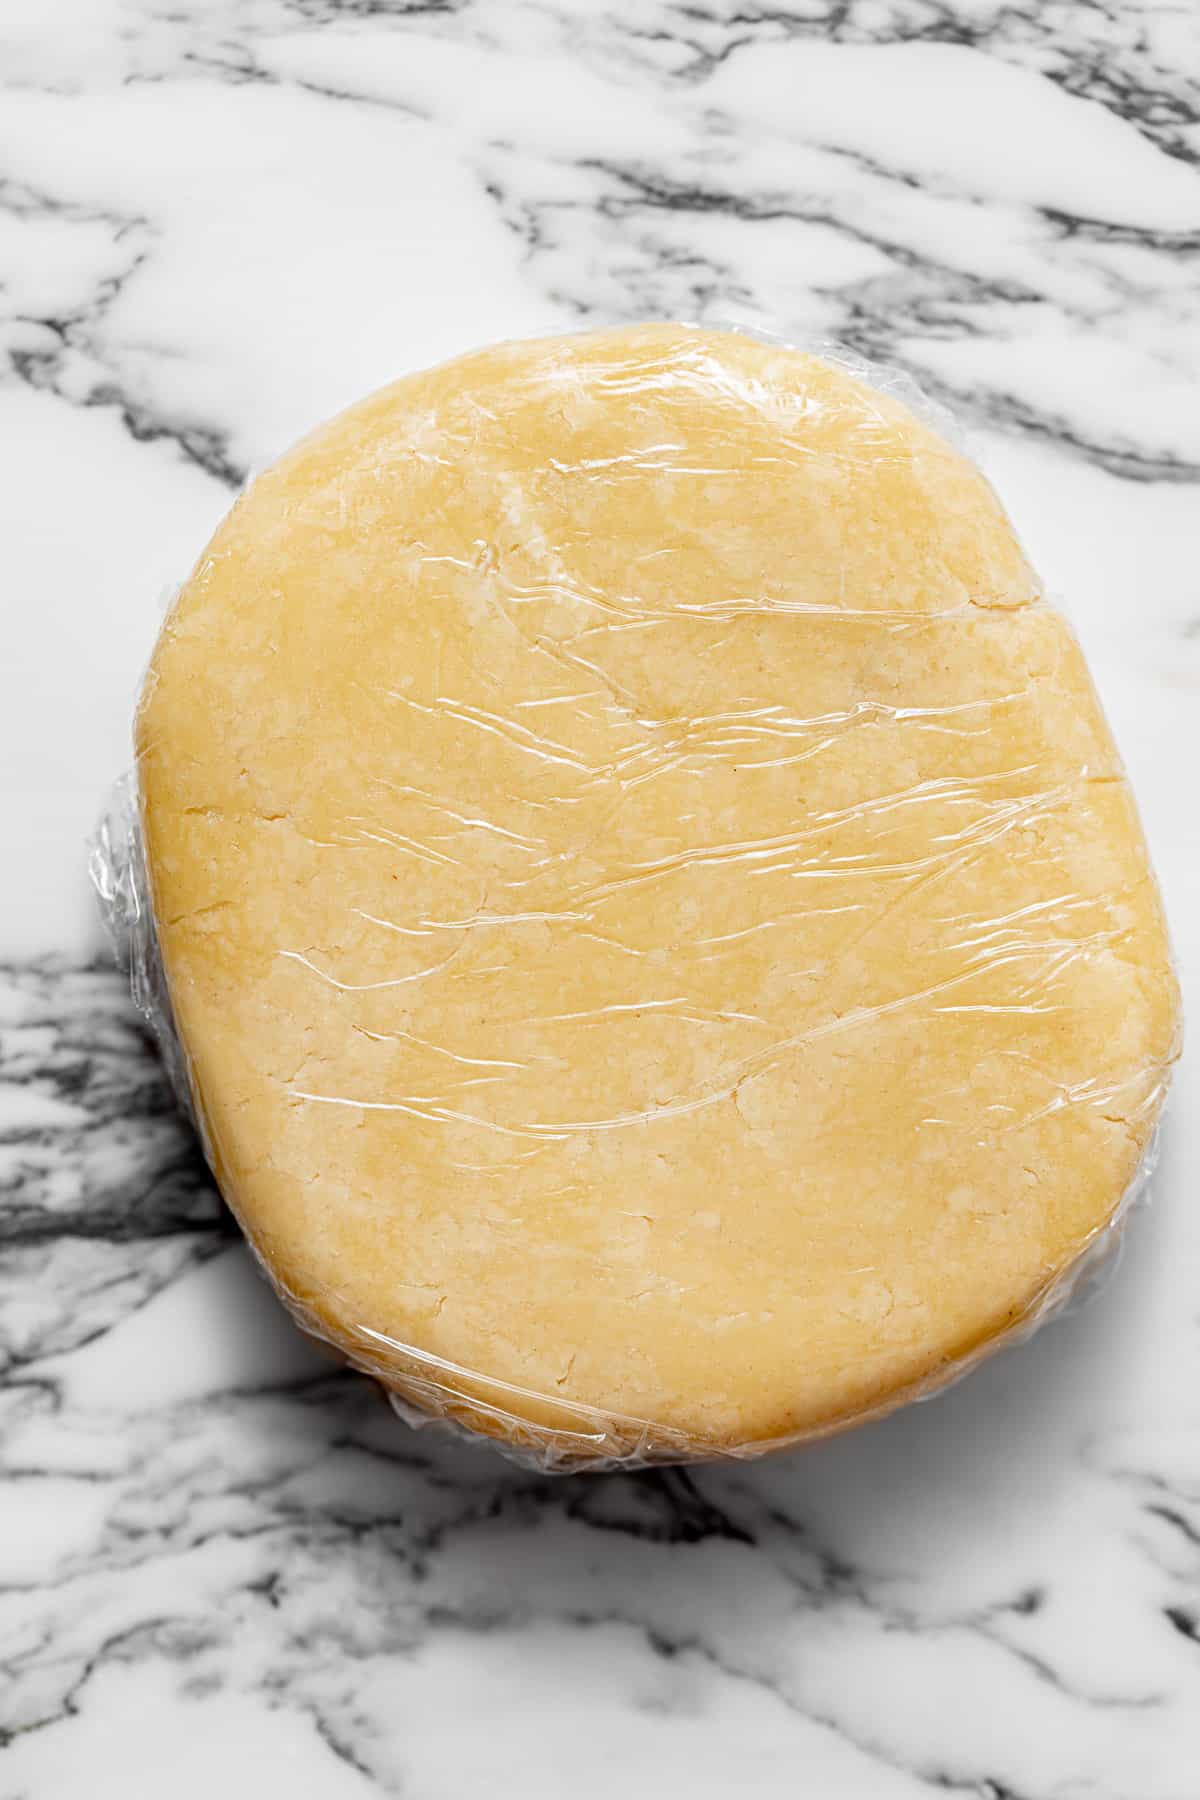 shortcrust pastry dough shaped into a disk and wrapped in plastic wrap.